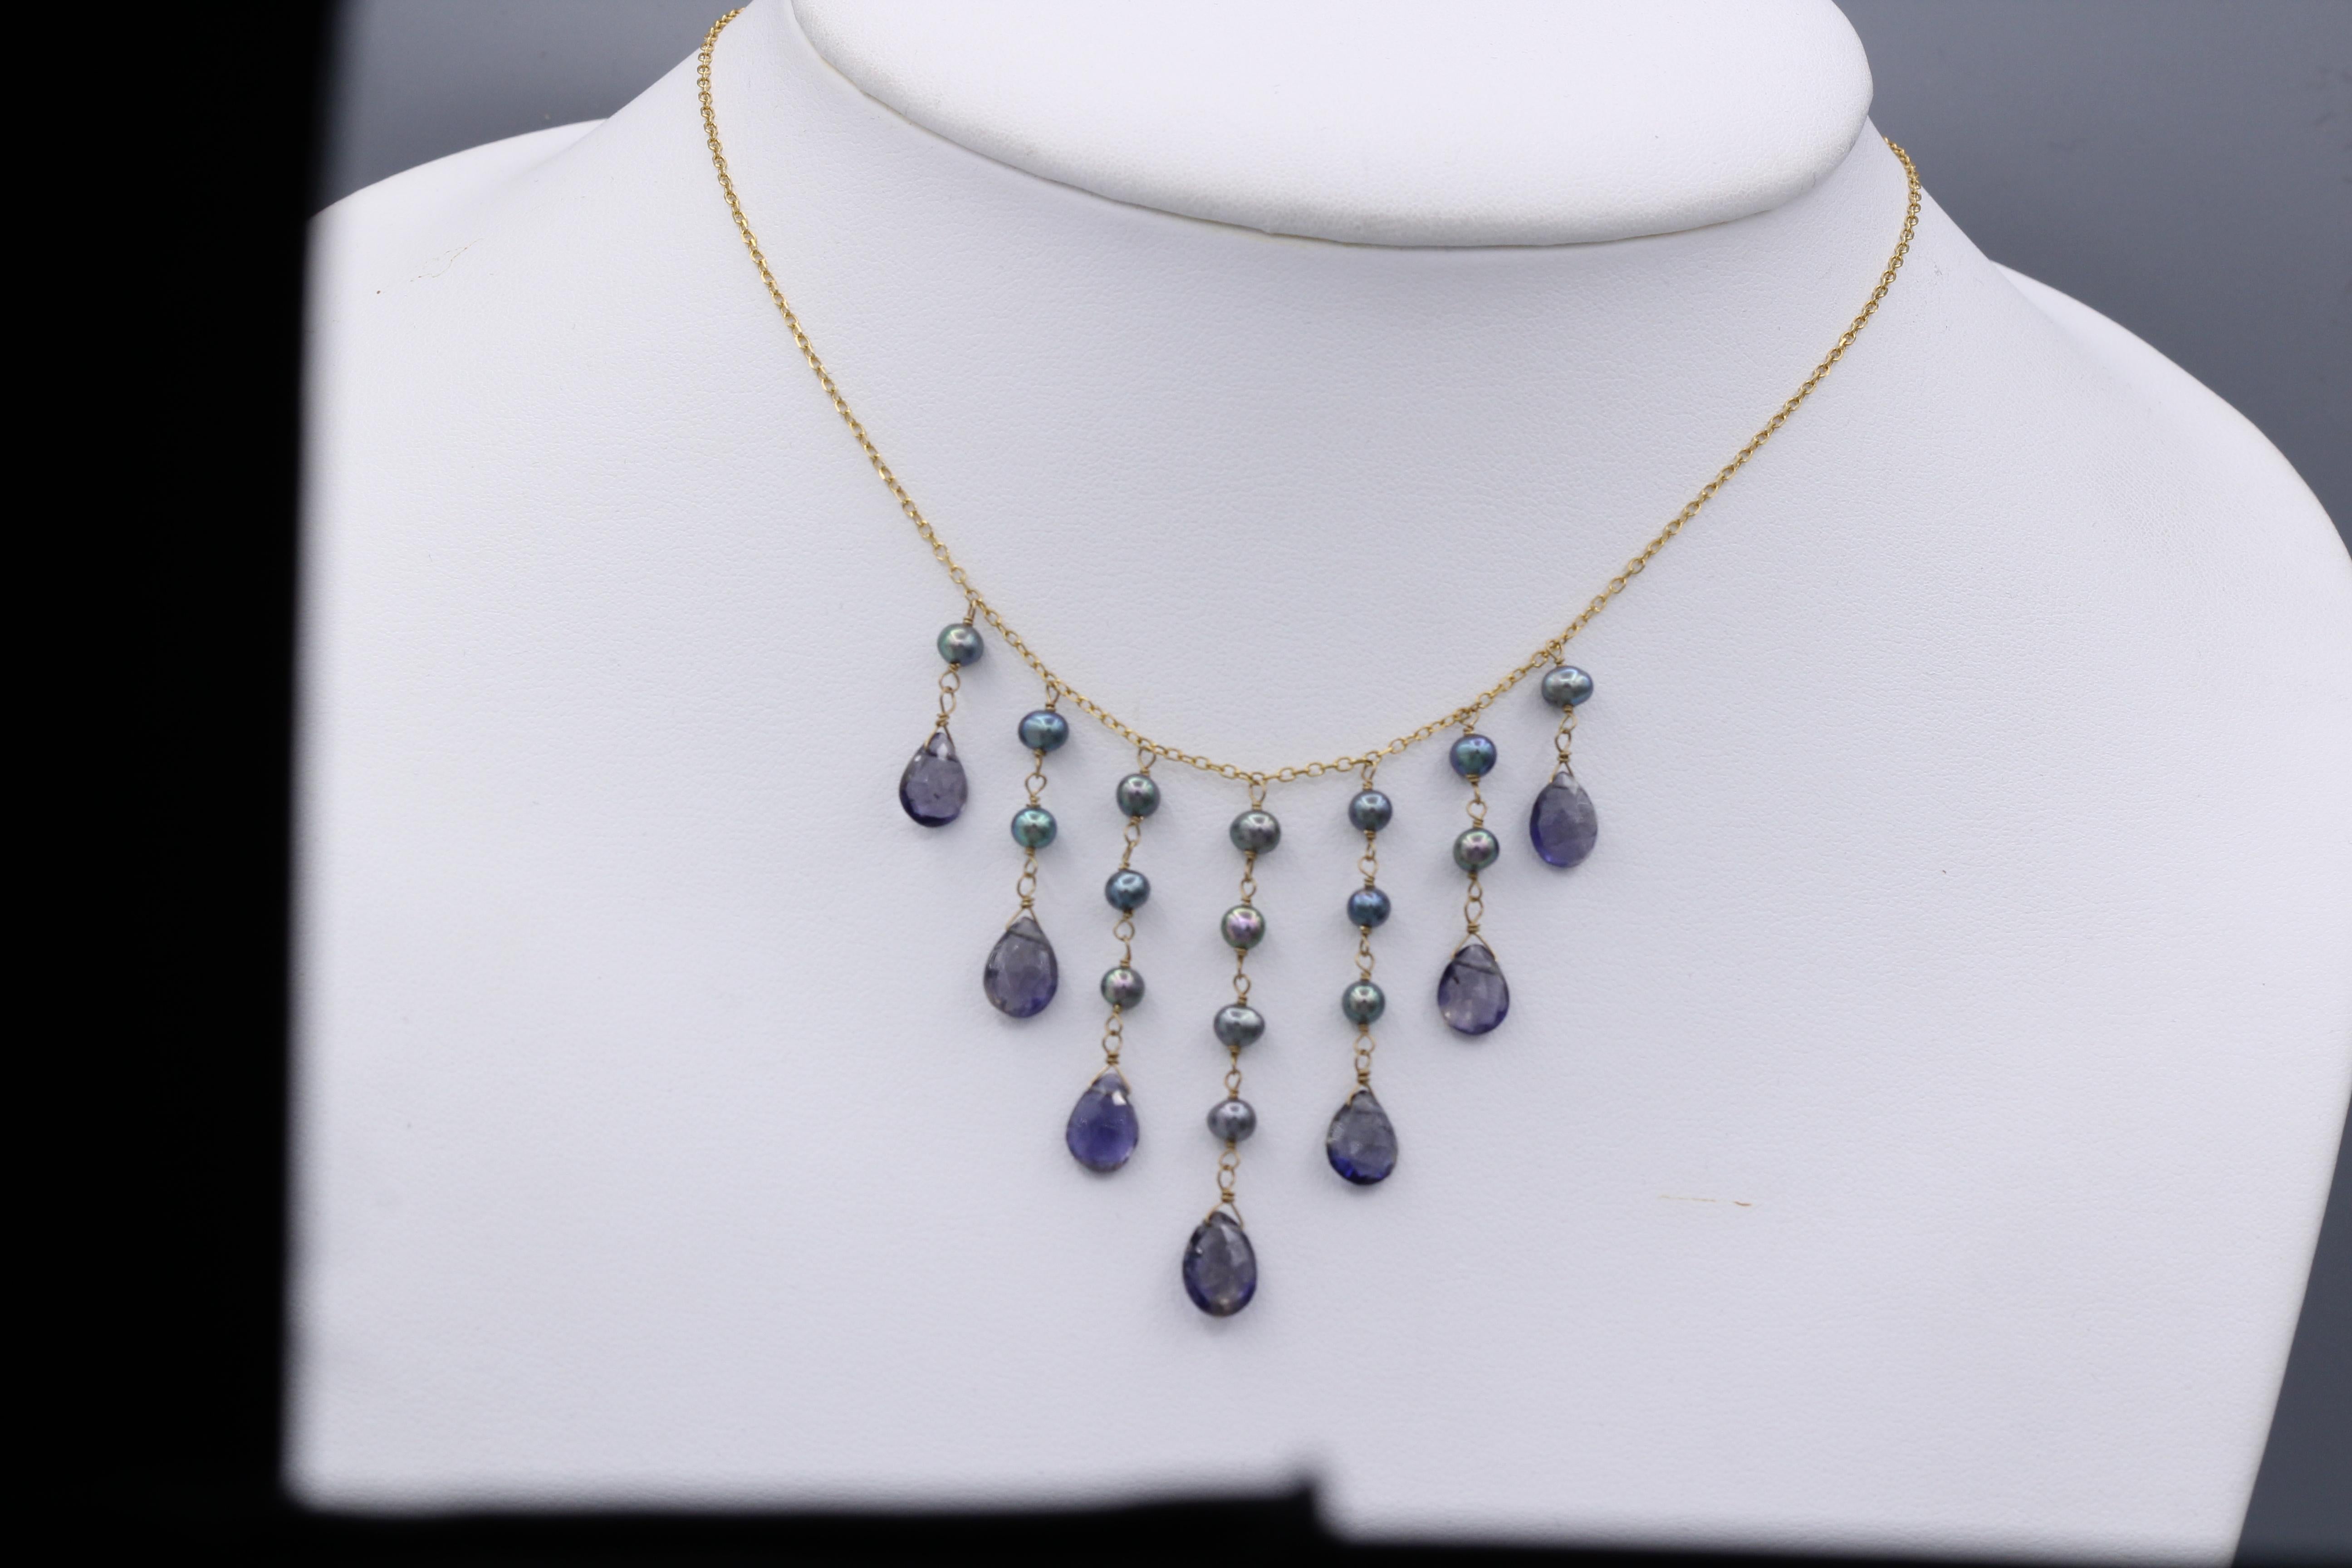 Dangling Necklace Blue Amethyst & Pearls Dangle Style 14 Karat Yellow Gold For Sale 4